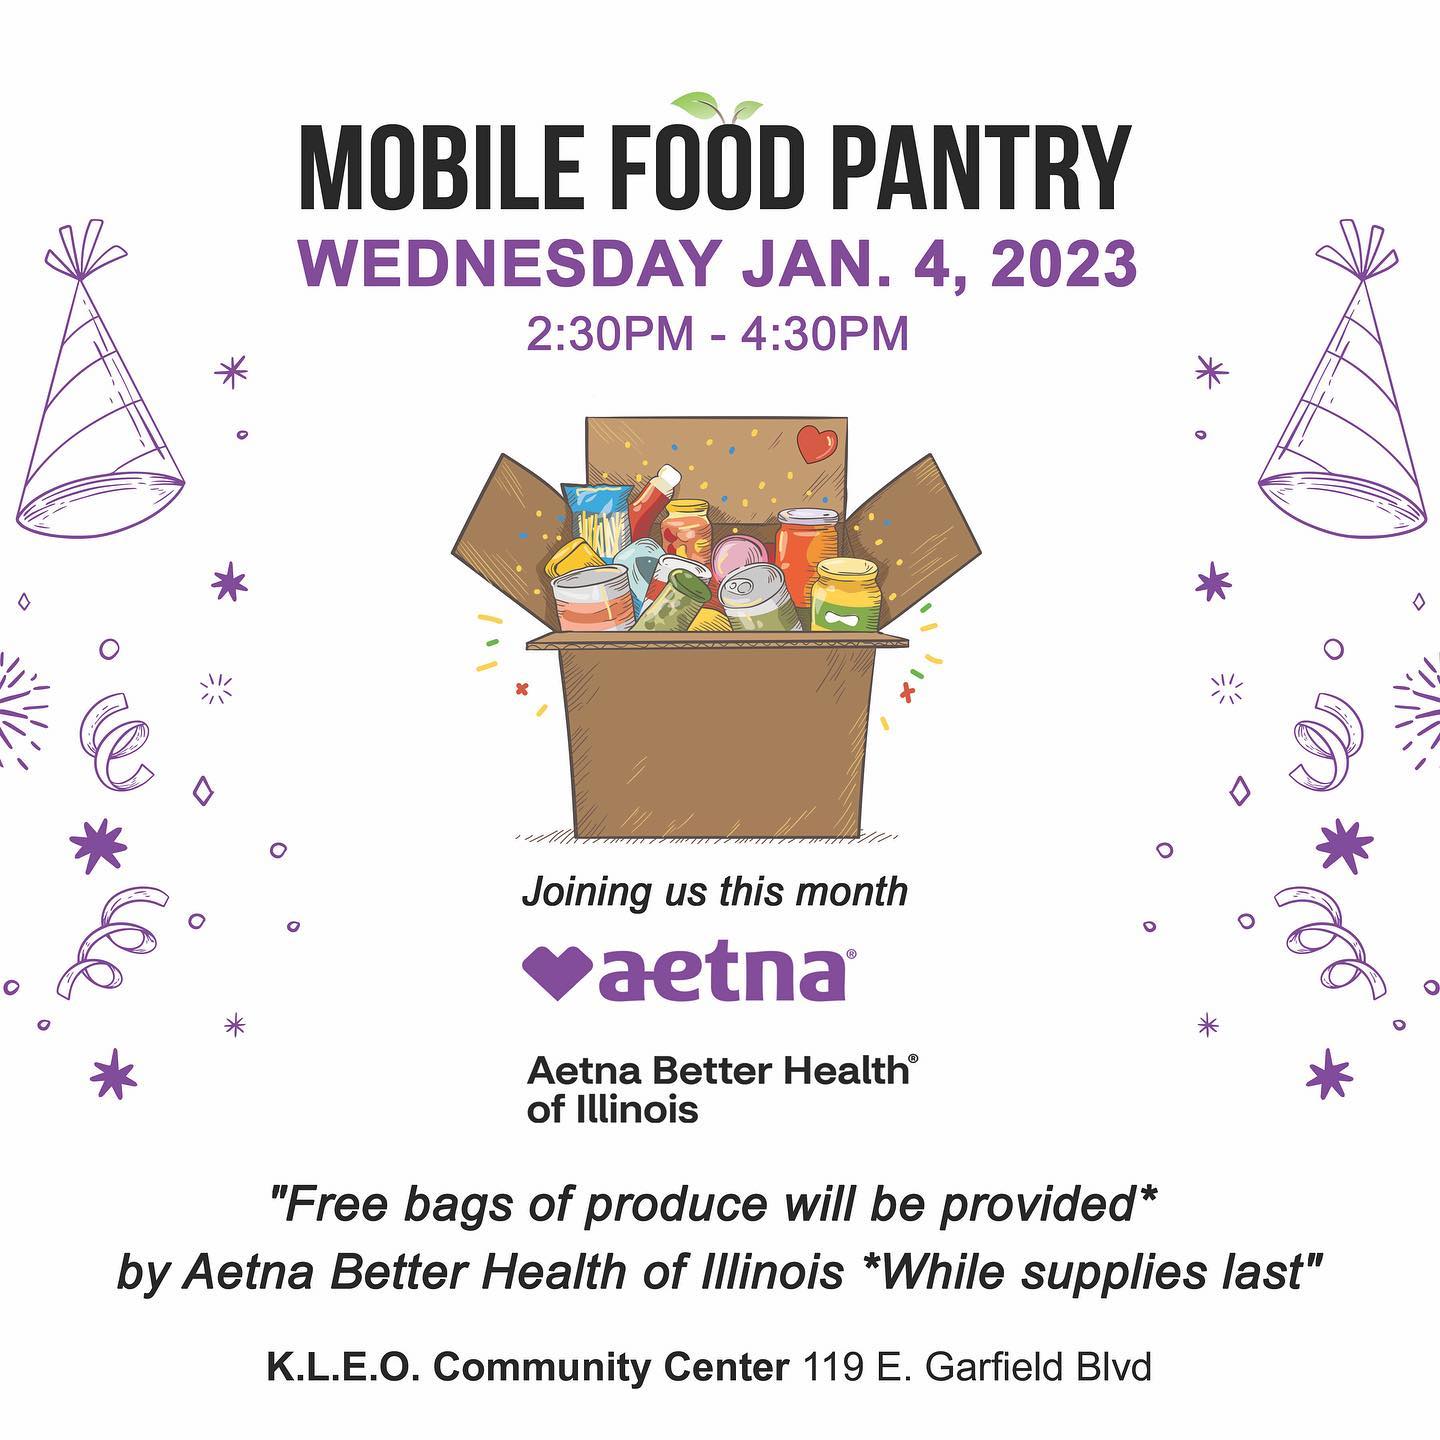 .

Our next Mobile Food Pantry is
JANUARY 4, 2023 
2:30PM - 4:30PM

Joining us
Aetna Better Health® of Illinois "Free bags of produce will be provided* by Aetna Better Health of Illinois *While supplies last"

K.L.E.O. Community Center 119 E. Garfield Blvd

Please share 💜

#mobilefoodpantry #kleo #kleocommunitycenter #keeplovingeachother #foodpantry #freefood #foodgiveaway #groceries #washingtonpark #aetnabetterhealth